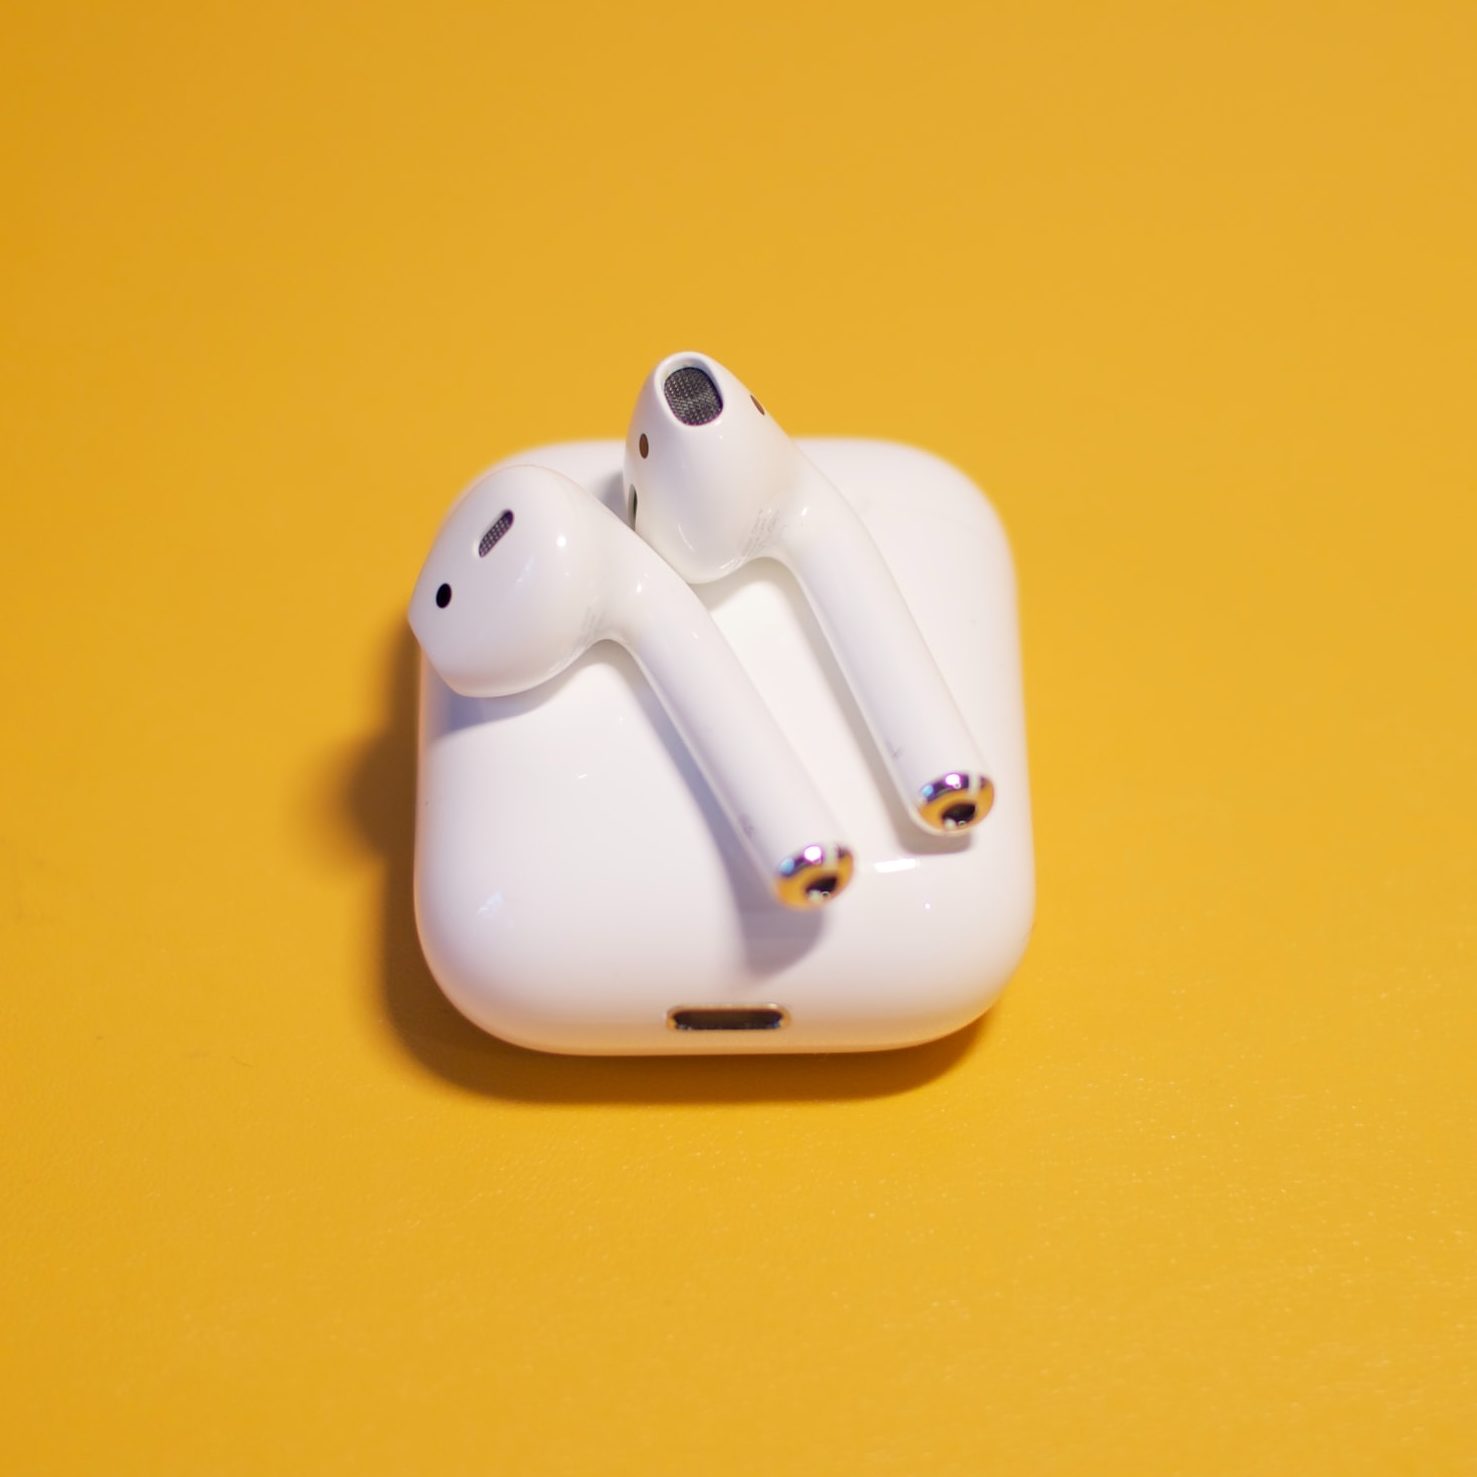 AirPods 2 on case with yellow background